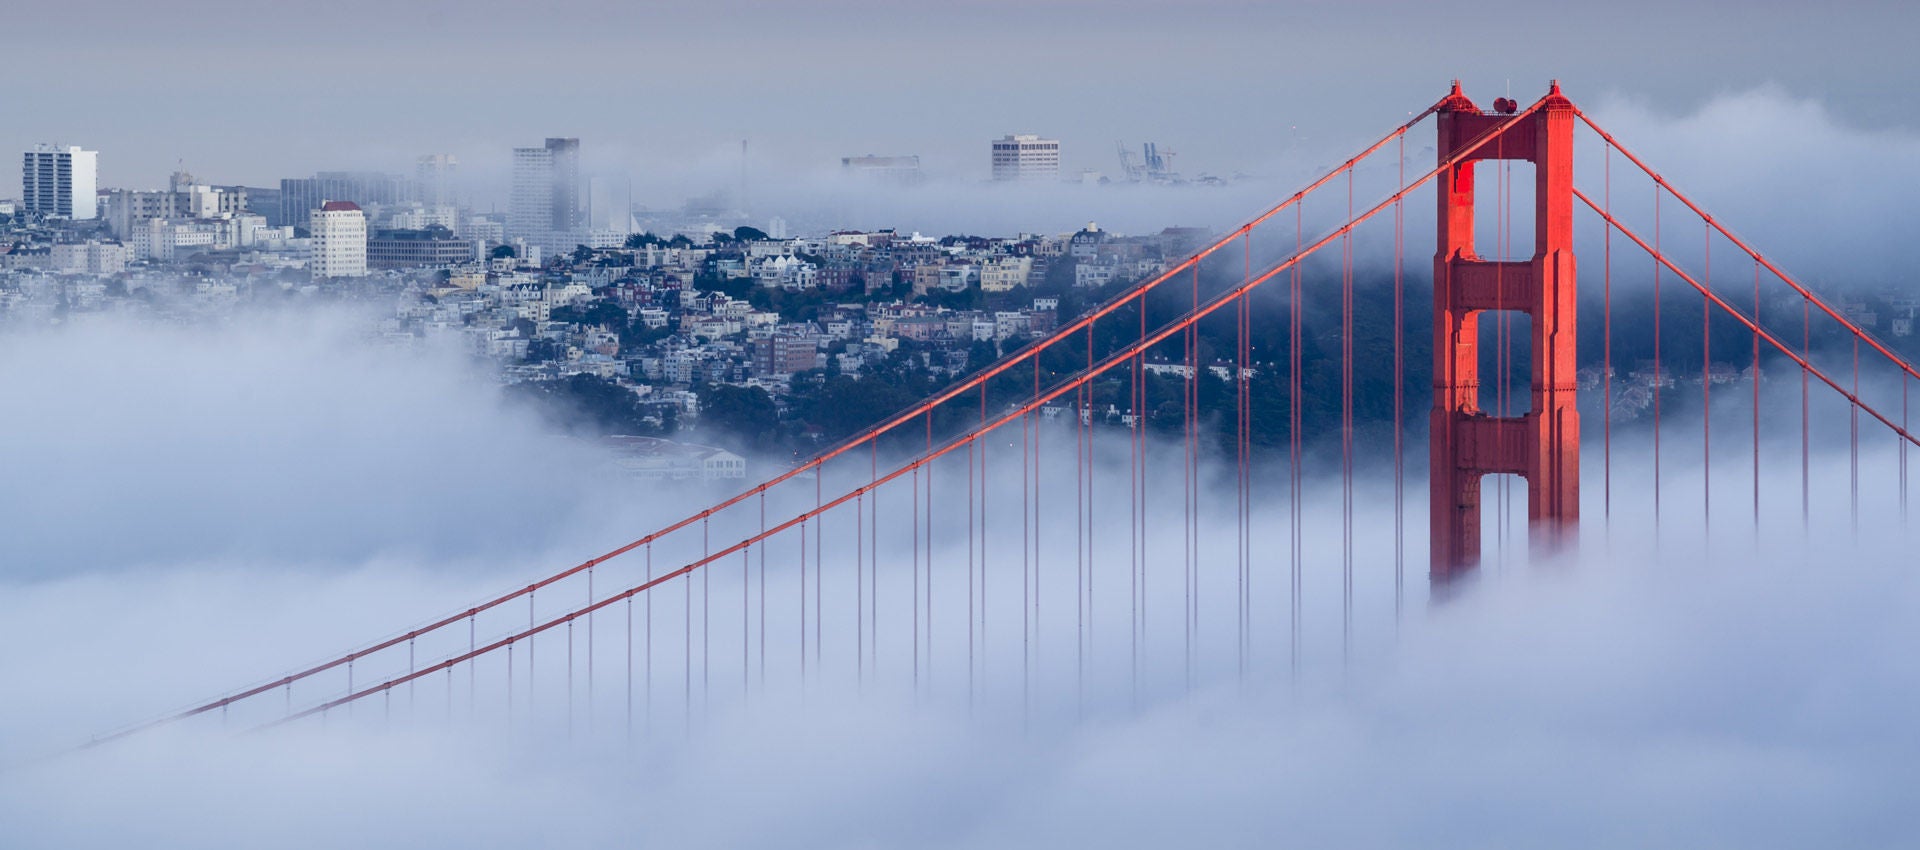 Dawn breaks over a foggy Golden Gate Bridge with the San Francisco skyline in the background.